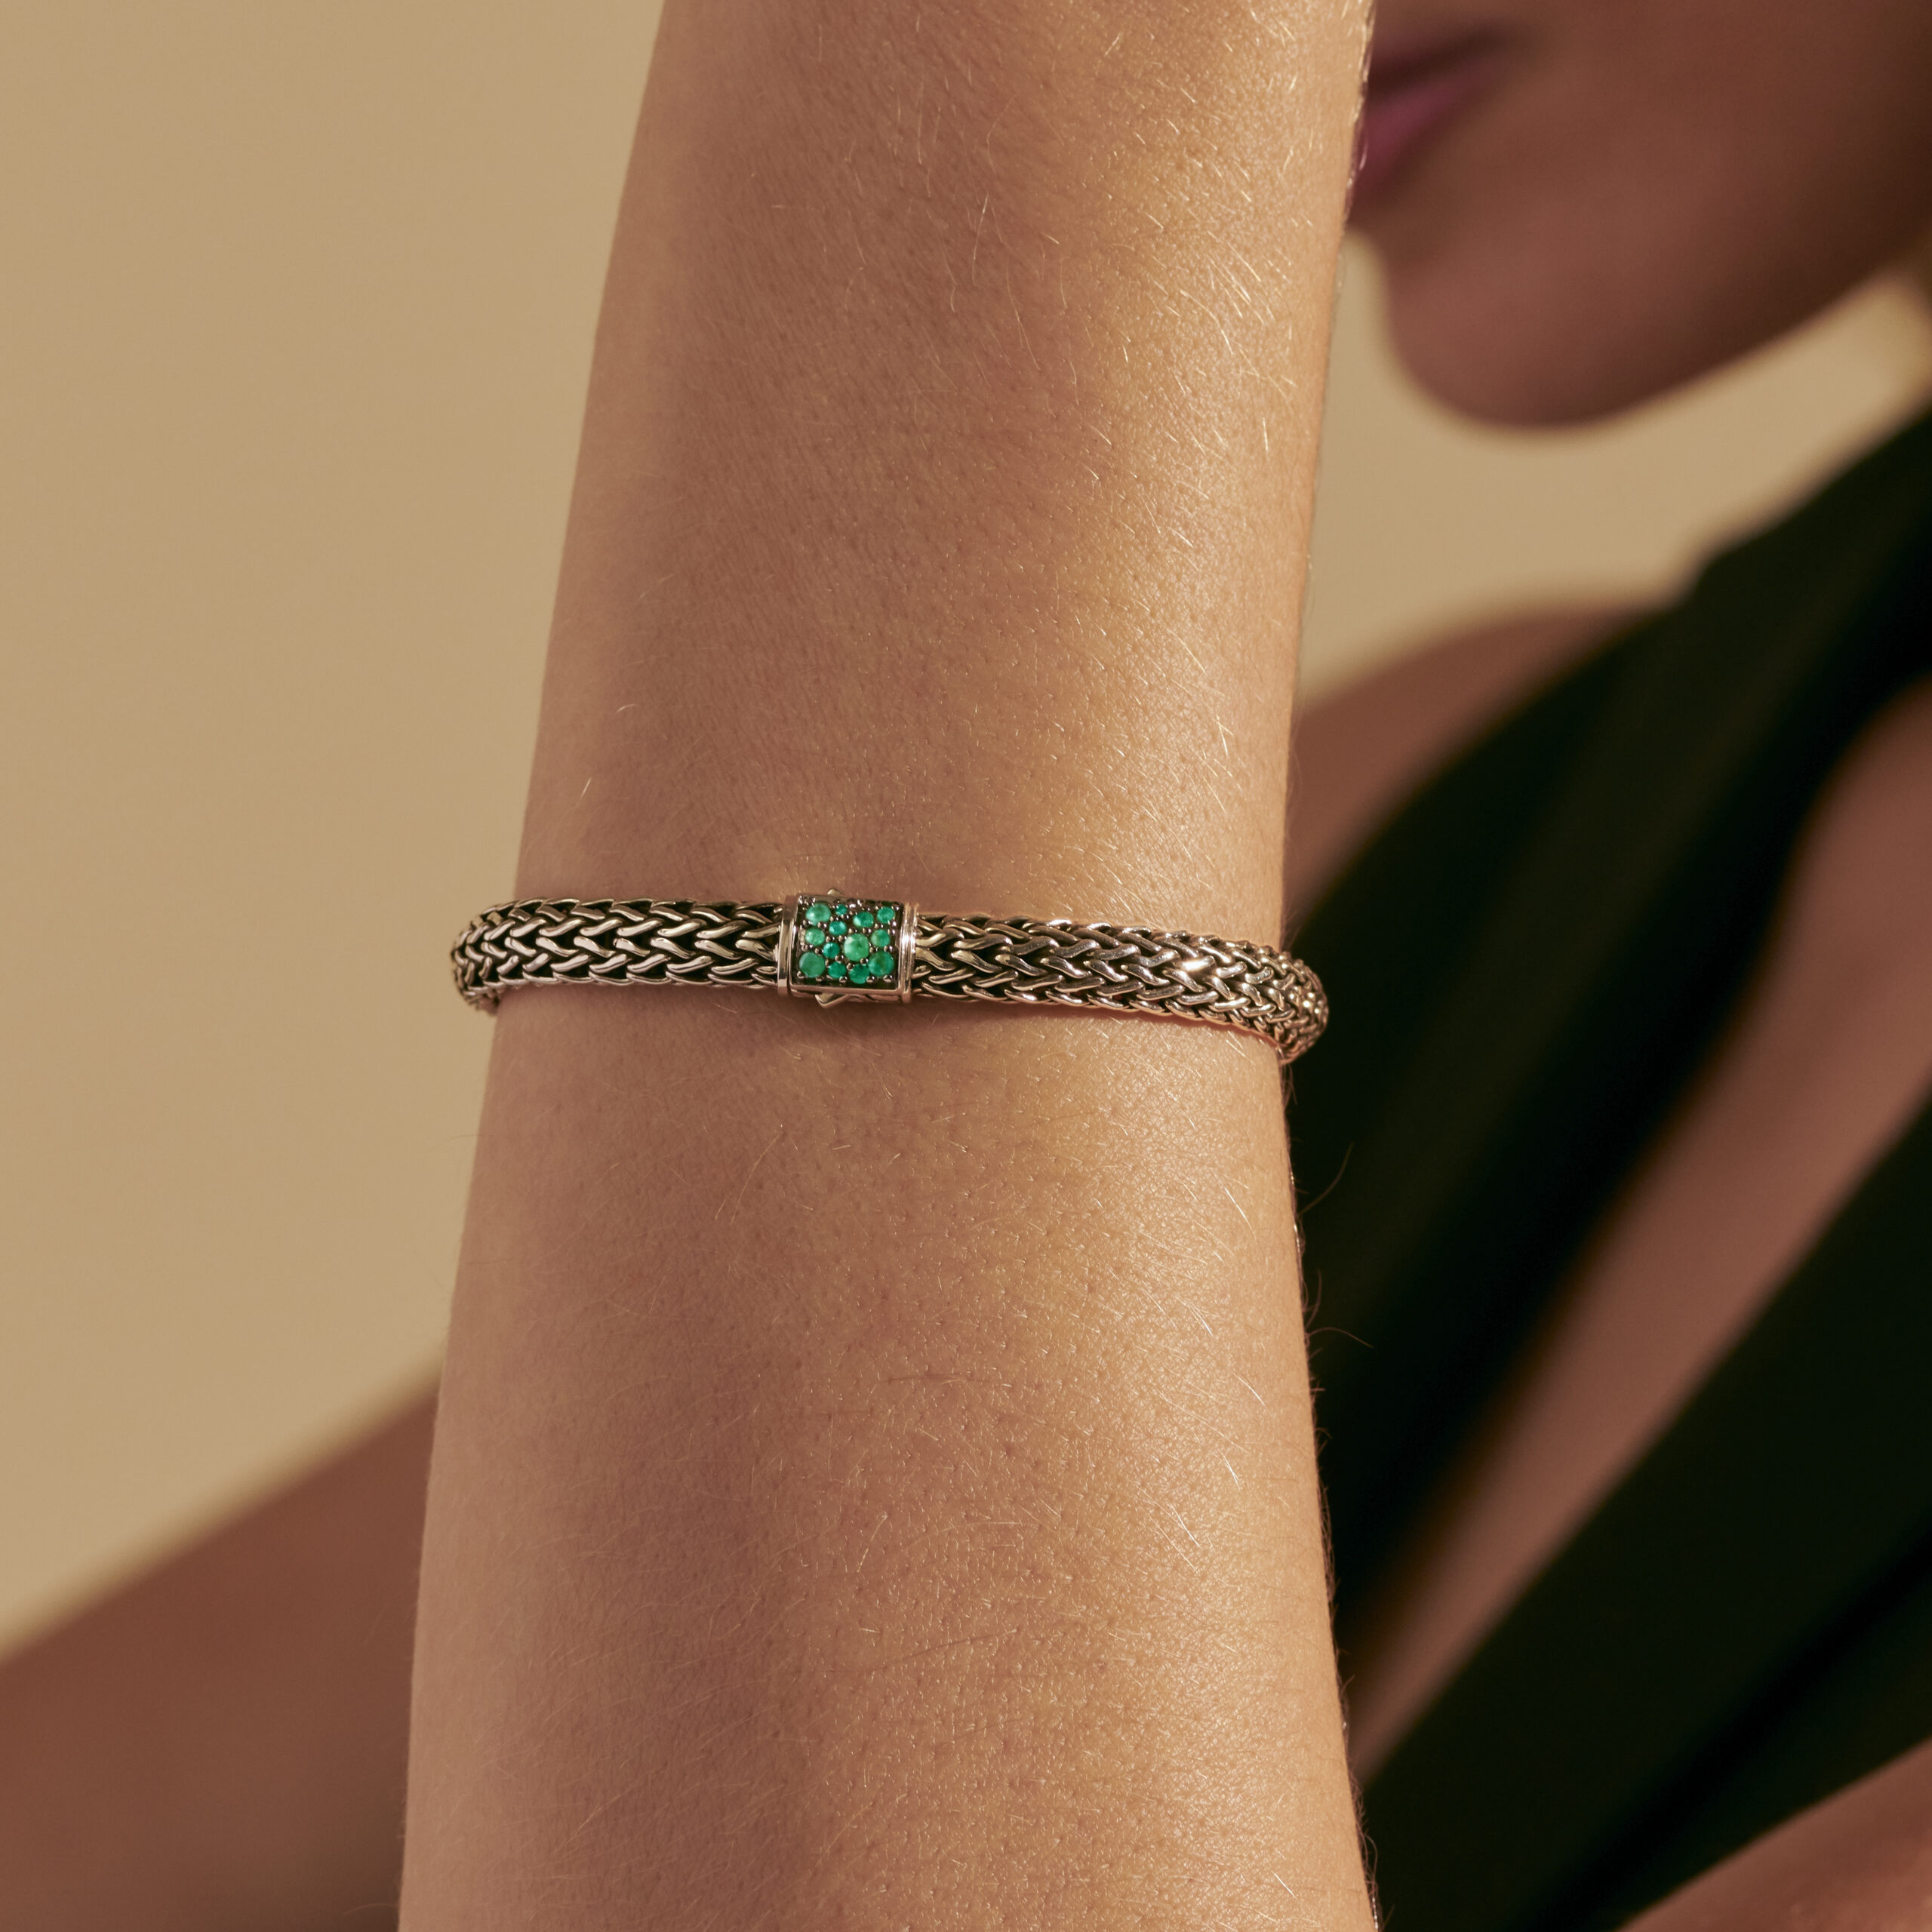 This reversible bracelet by John Hardy is crafted from sterling silver and features emerald and black sapphires in the clasp.